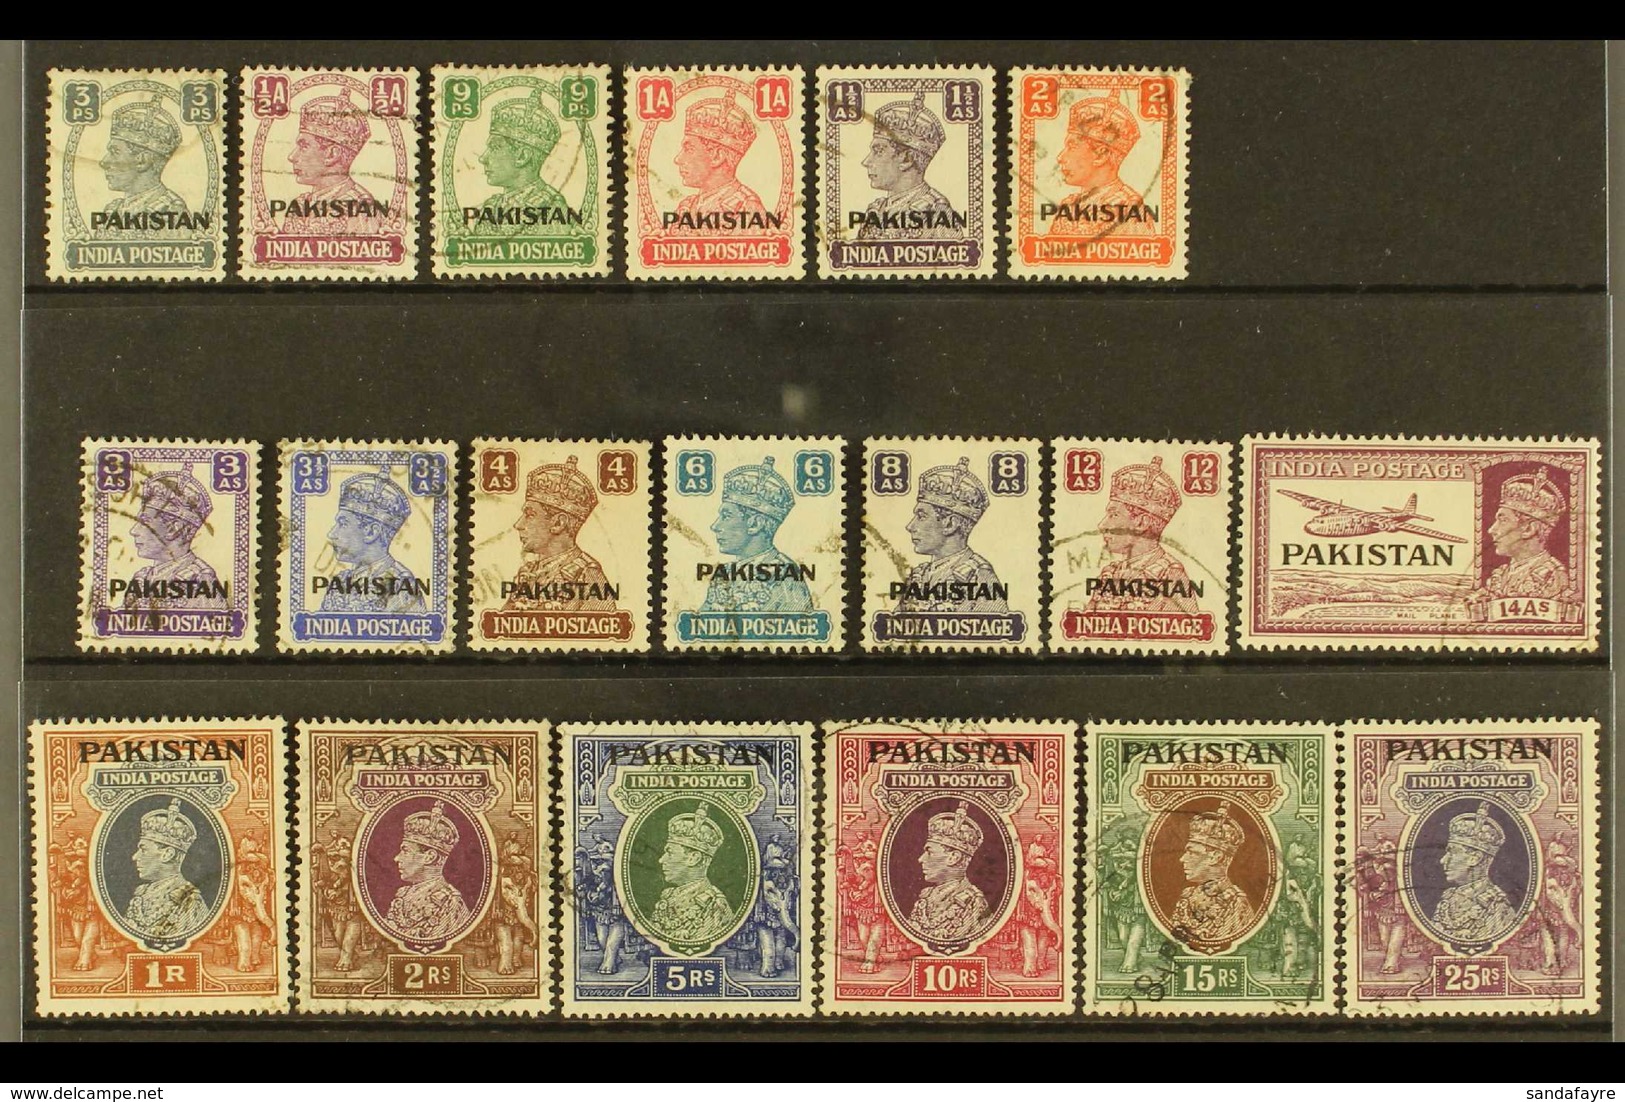 1948  KGV Of India Opt'd Complete Set, SG 1/19, 15r With A Short Perf, The Rest Are Fine Used (19 Stamps) For More Image - Pakistan